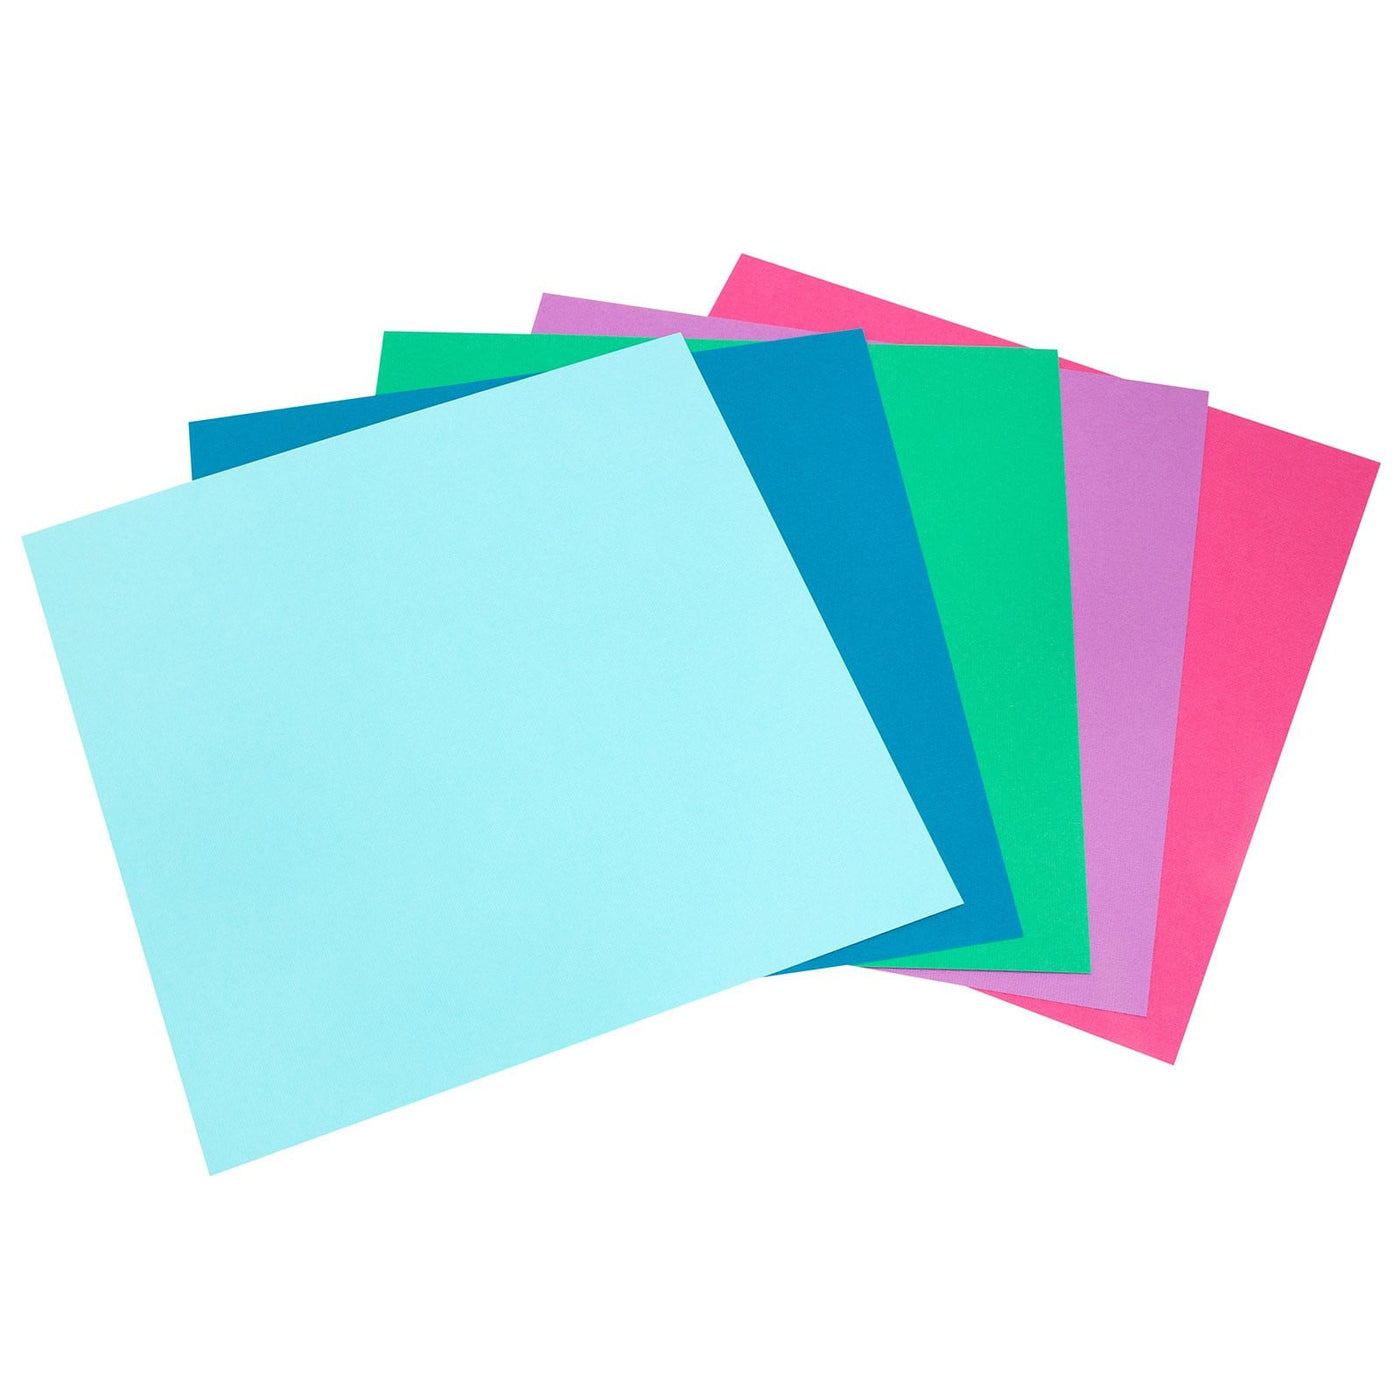 12 Pack: Jewel Colors Textured Paper Pad by Recollections™, 4.5 x 6.5 